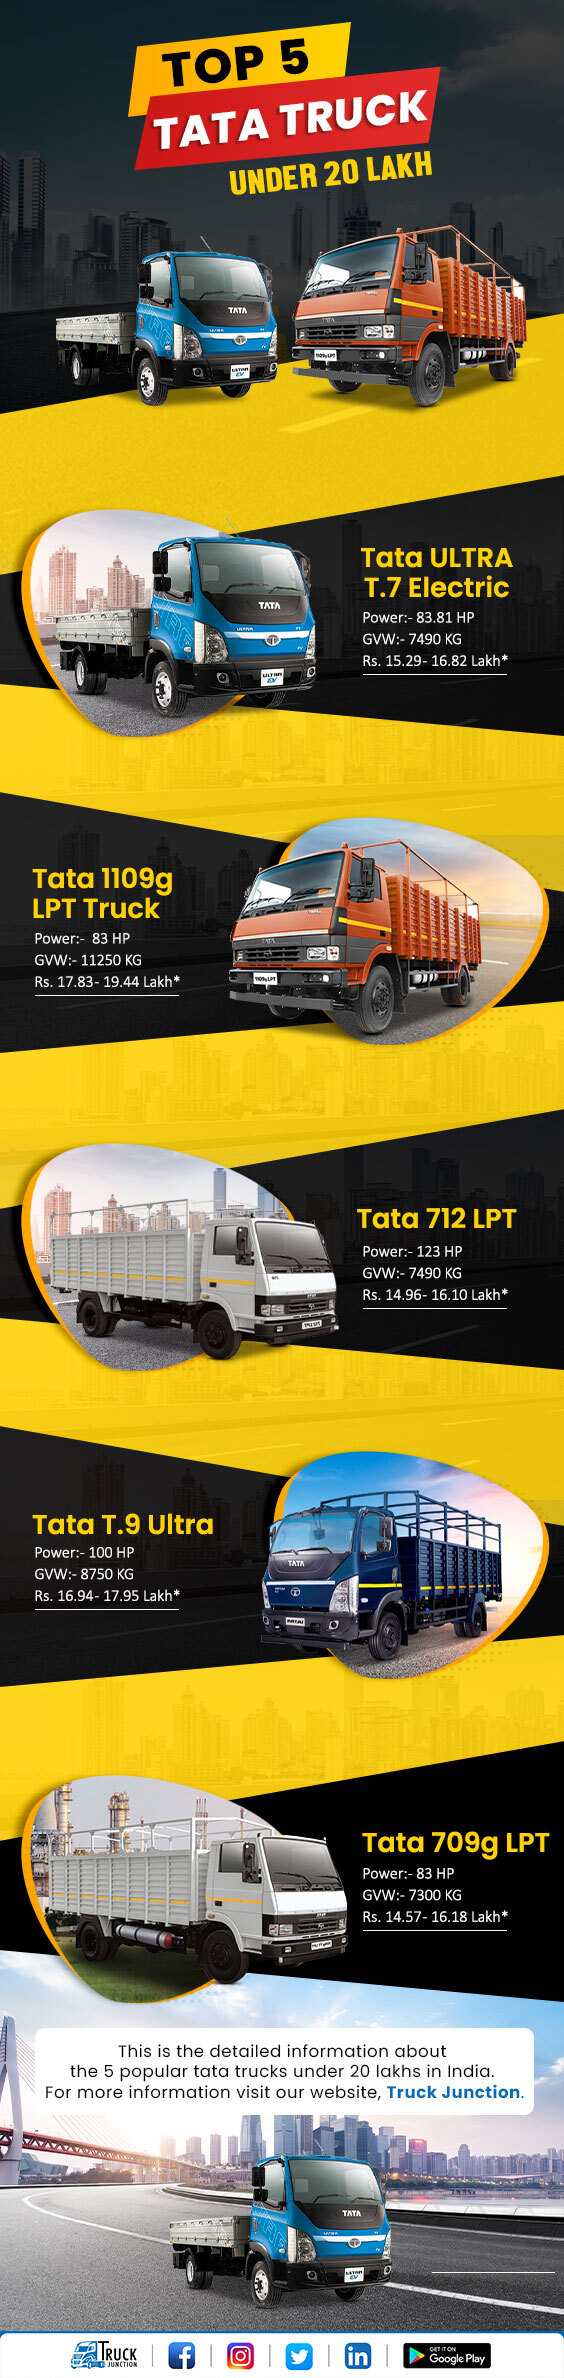 Top 5 Tata Trucks Under 20 Lakh In India- Price And Variants